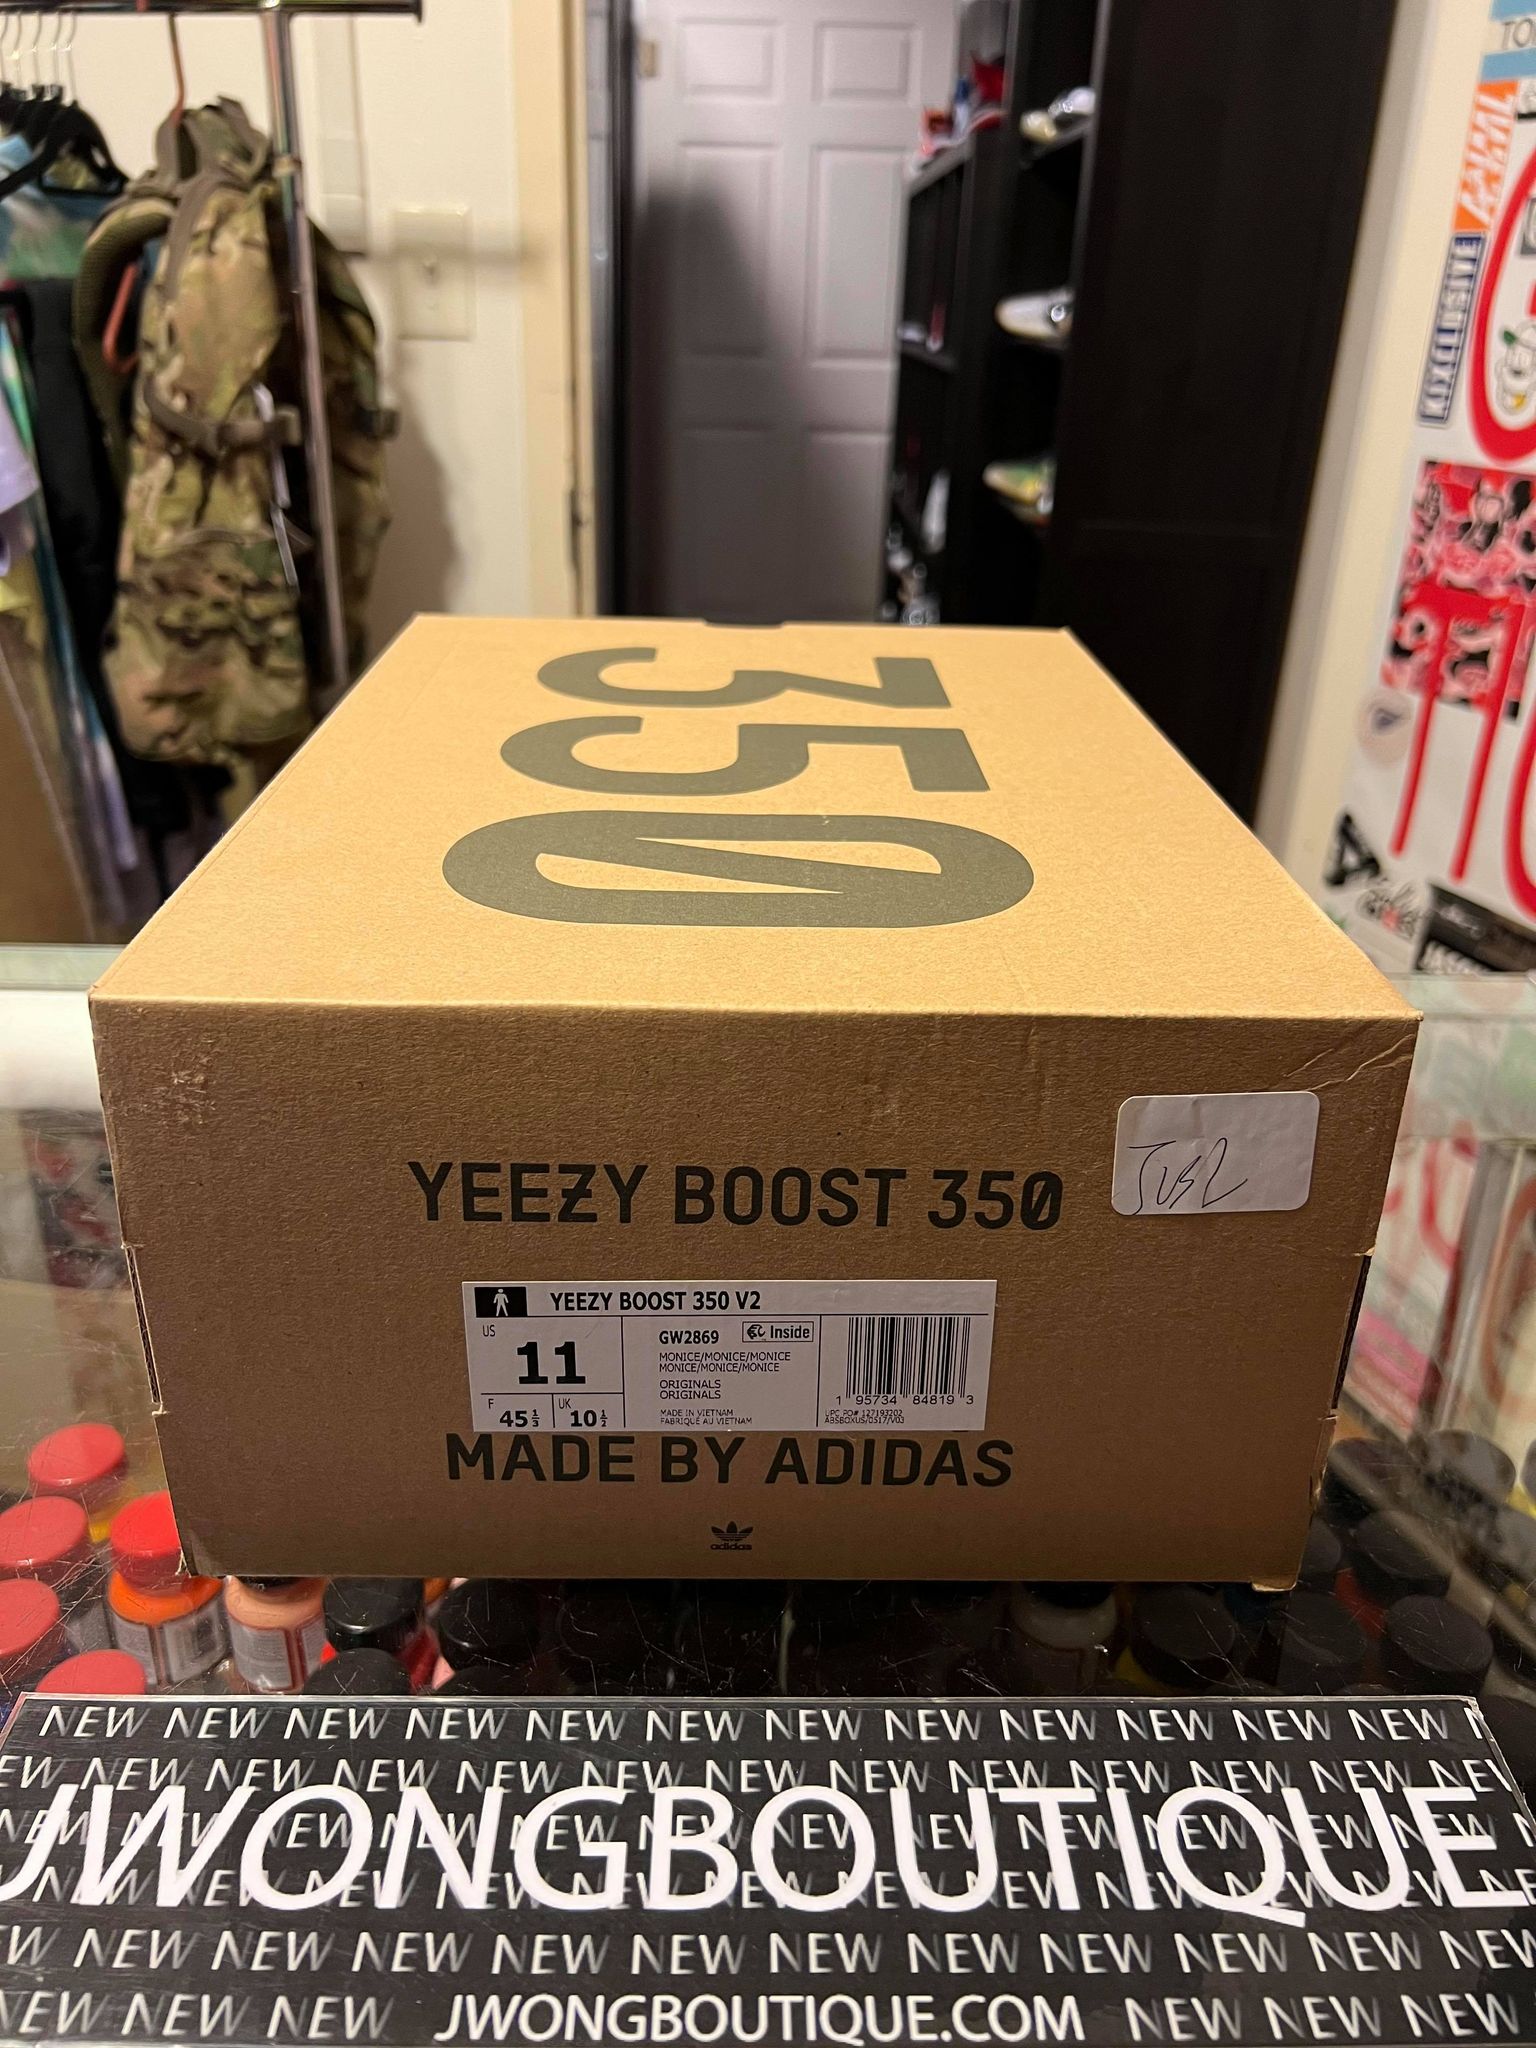 yeezy boost 350 with box